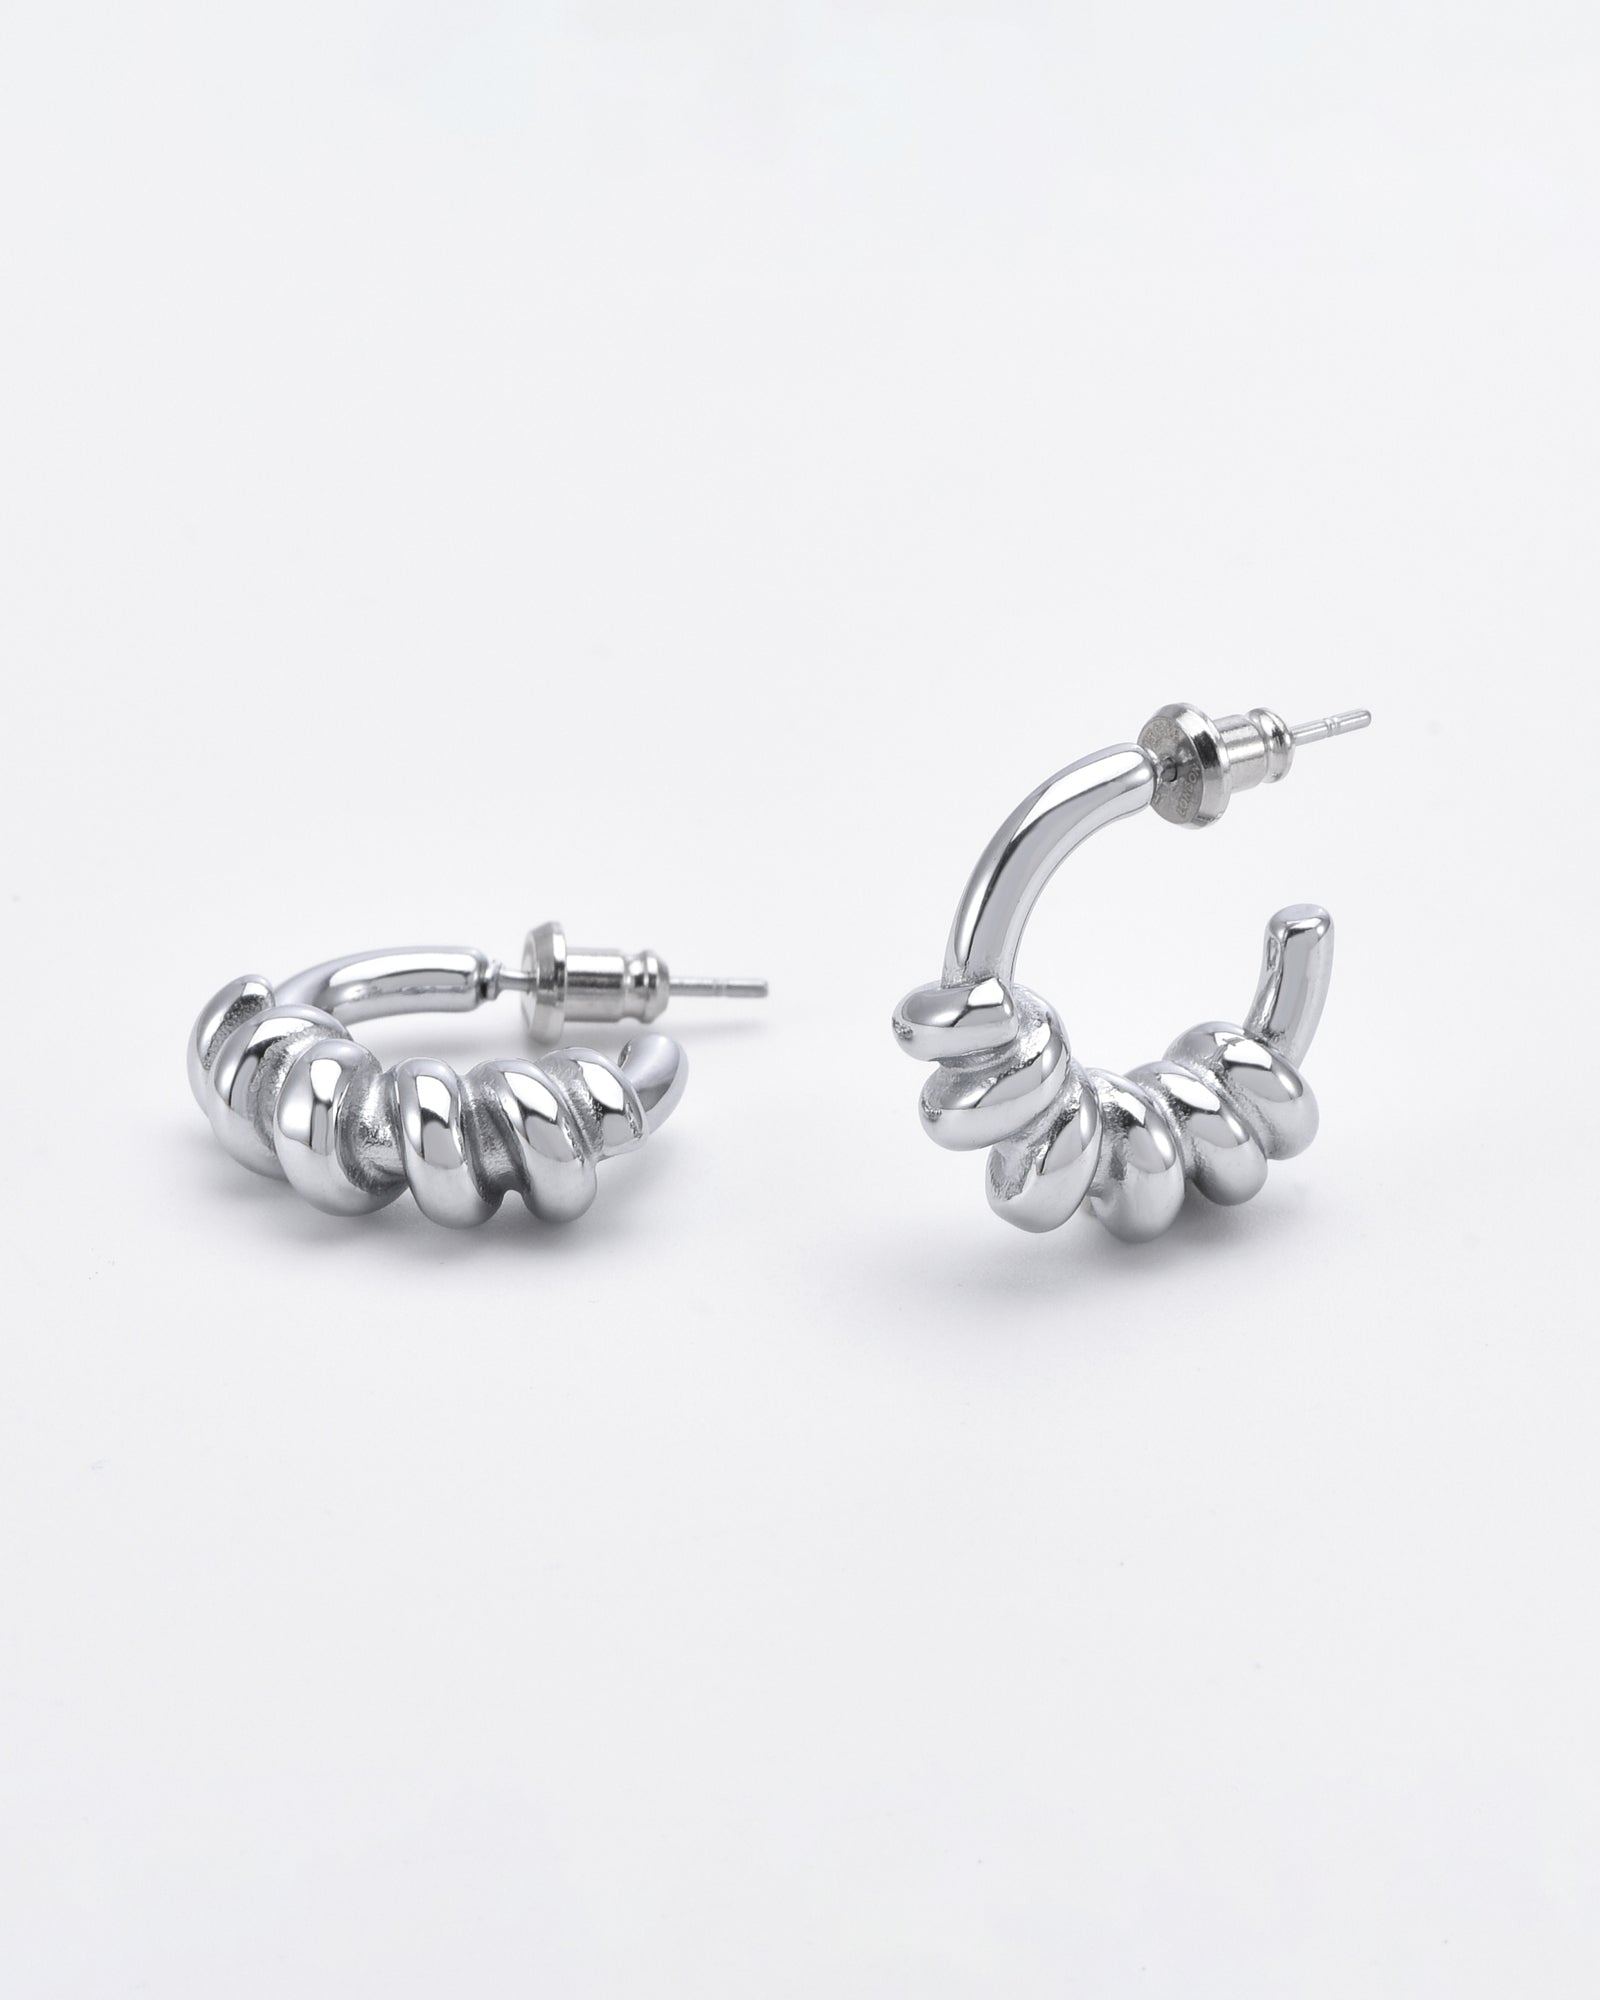 A pair of Swirl Earrings Silver from For Art's Sake® are displayed on a white background. One earring is standing upright, while the other lies on its side, showcasing their shiny and polished finish.